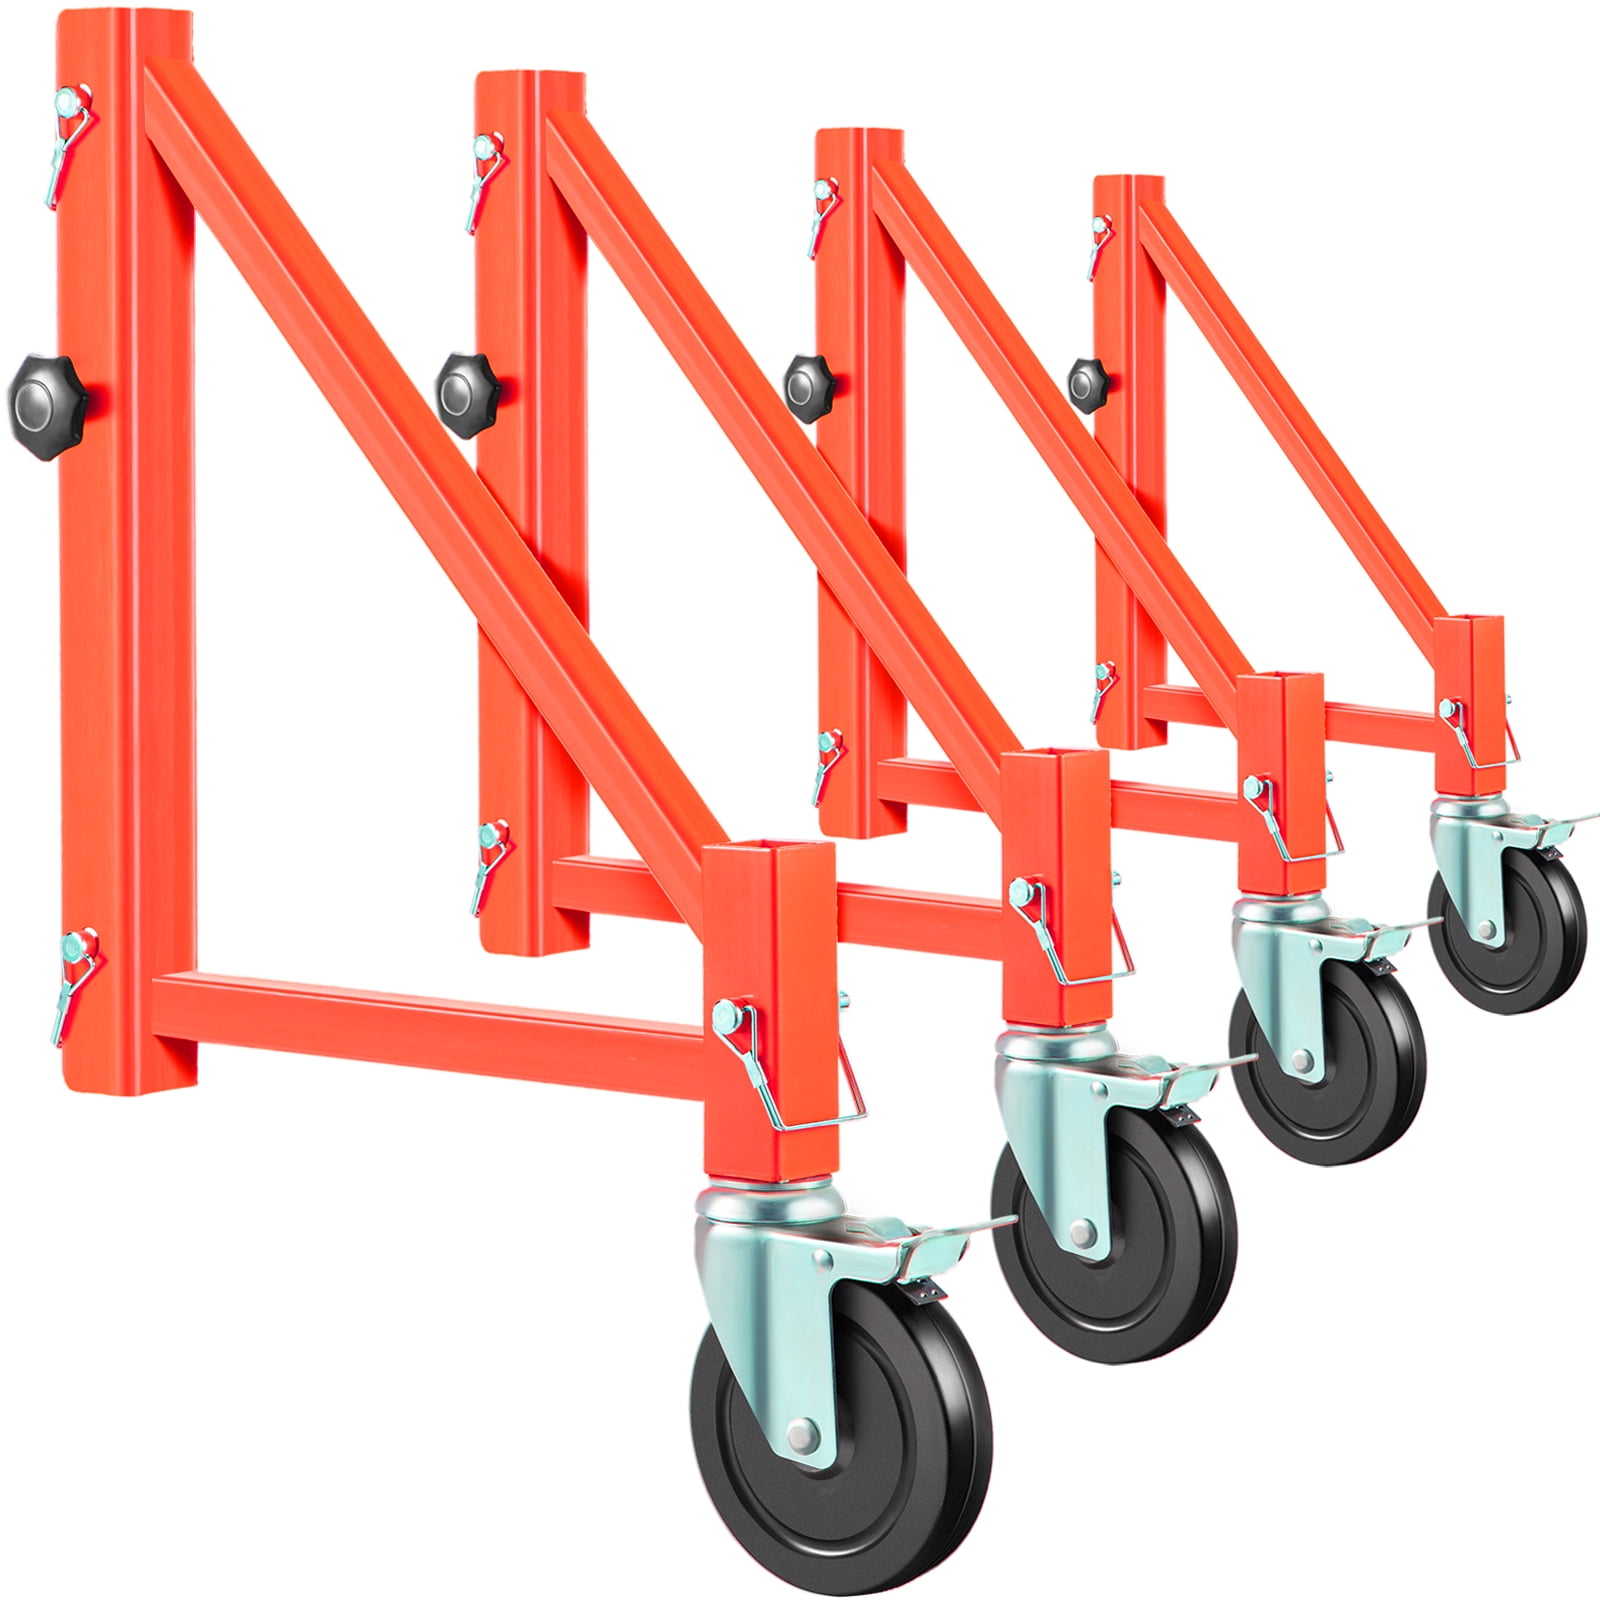 Red Steel Pump Jack Double Lock Portable Scaffolding Construction Foot Operated 